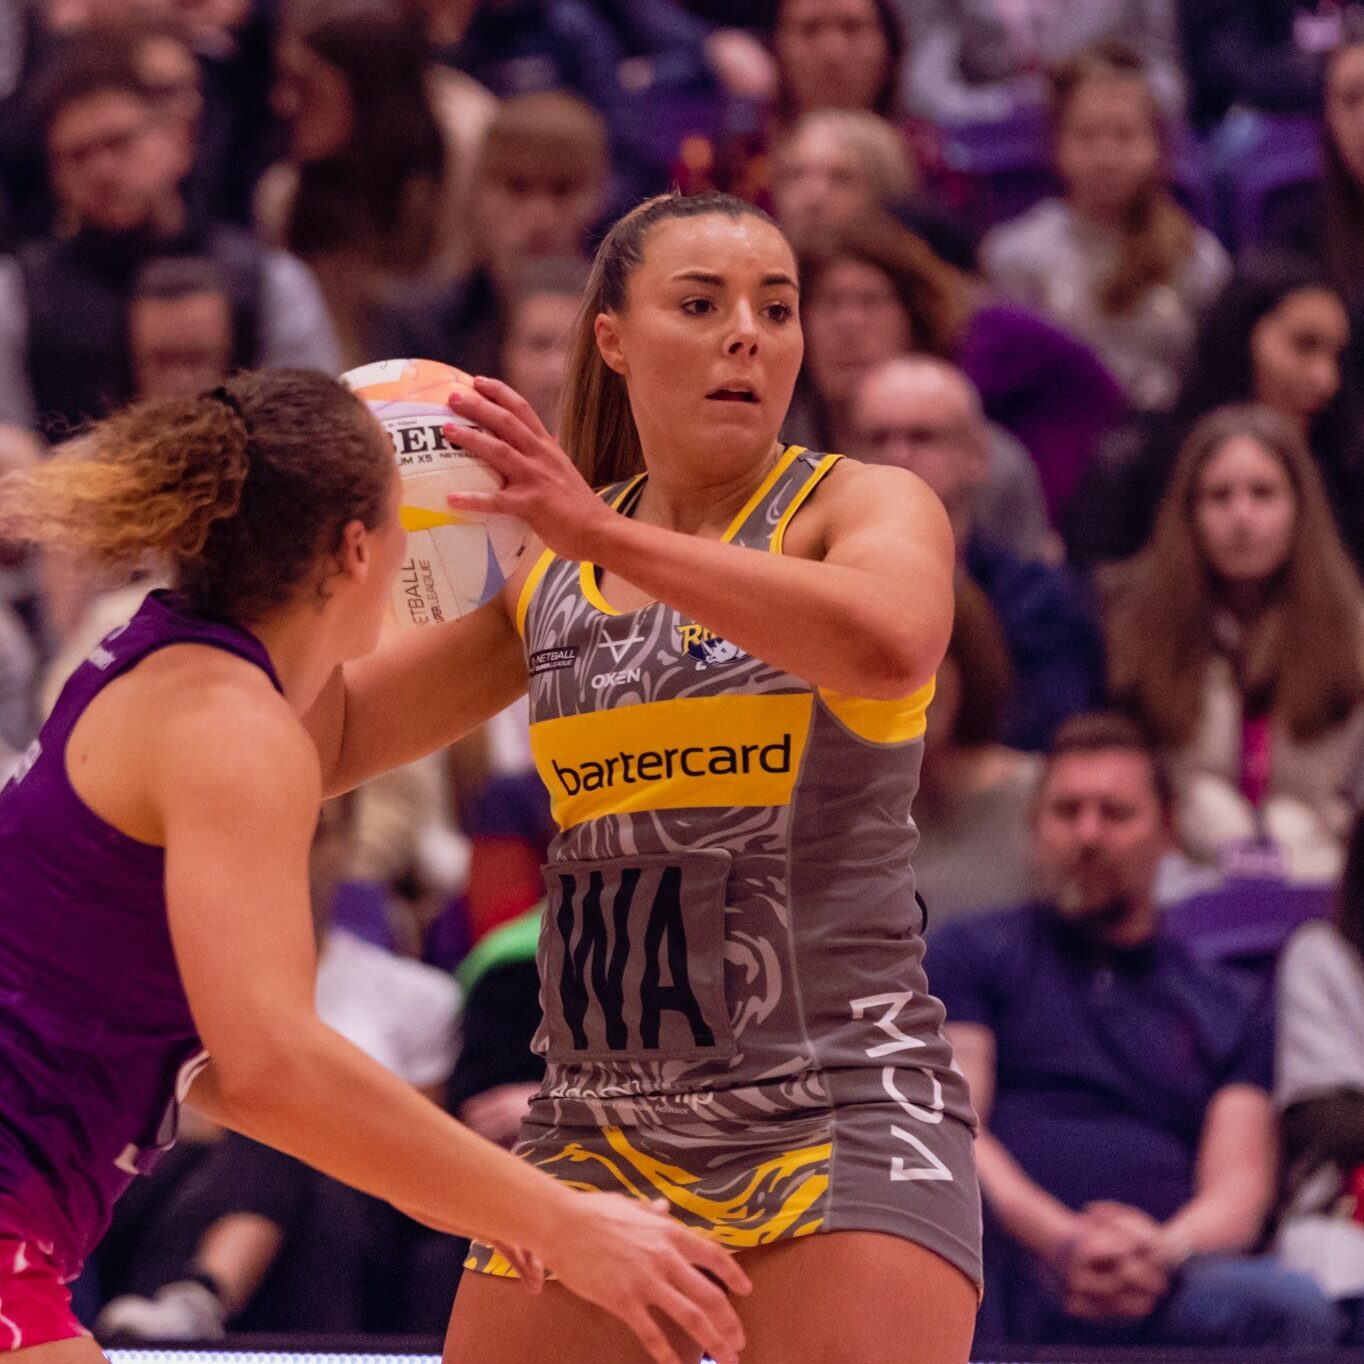 Taken during the Netball Super League game between Loughborough Lightning and Leeds Rhinos at the Sir David Wallace Arena, Loughborough, England on 19th March 2023.